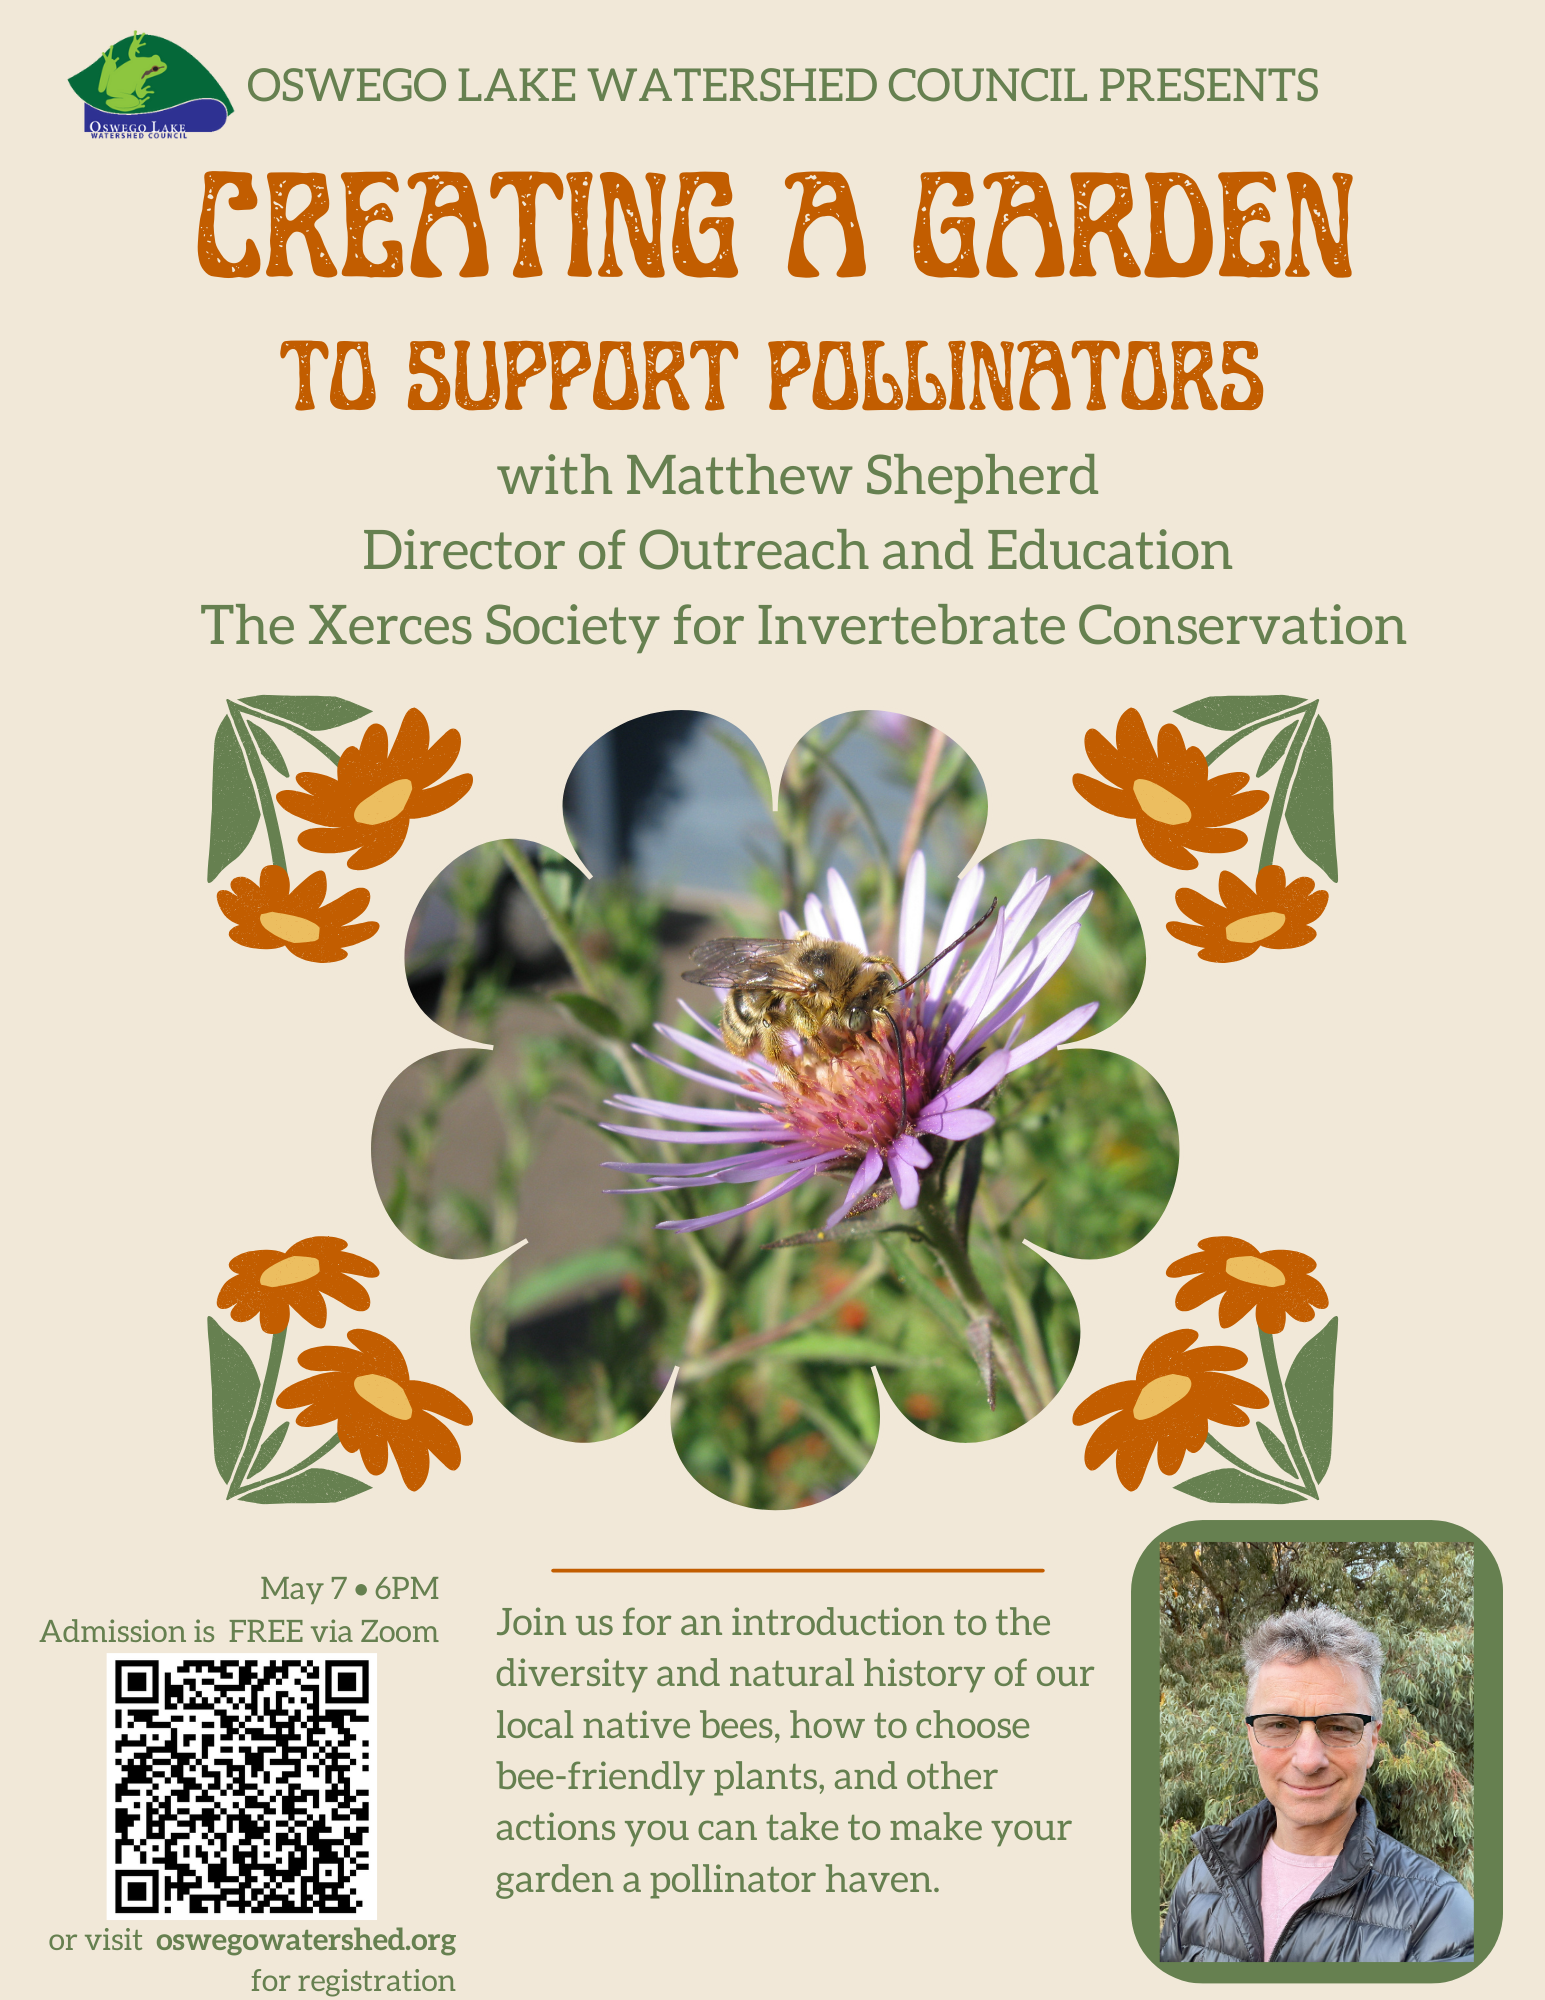 Join us for an introduction to the diversity and natural history of our local native bees, how to choose bee-friendly plants, and other actions you can take to make your garden a pollinator haven. Matthew Shepherd is the Director of Outreach and Education with The Xerces Society for Invertebrate Conservation.